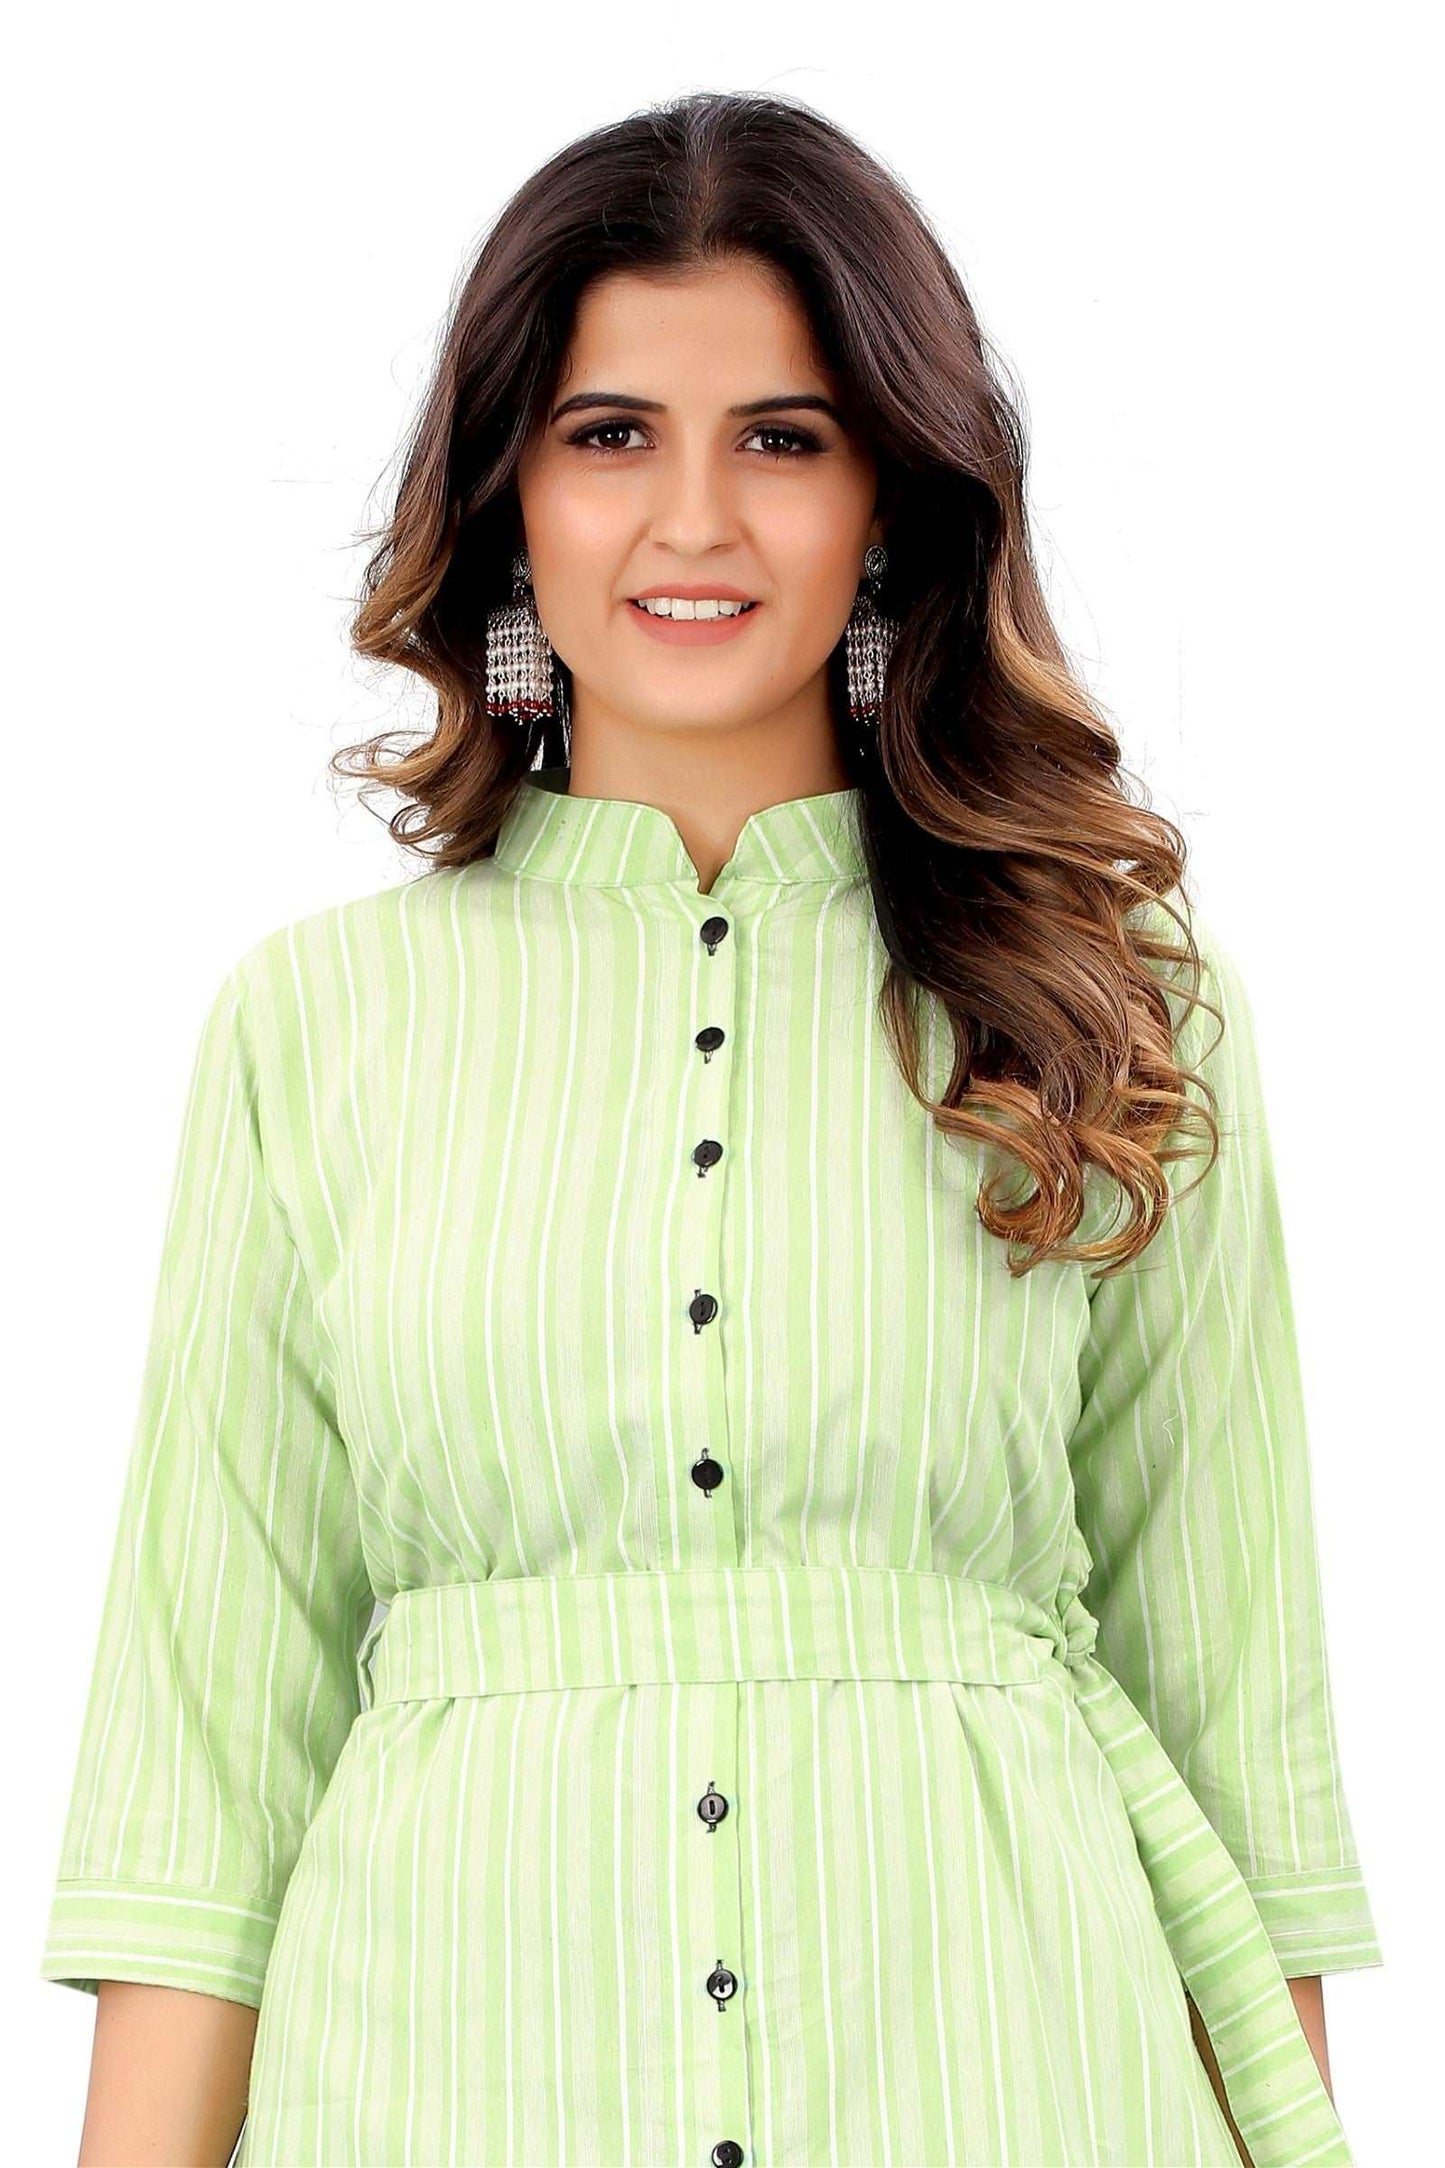 The model in the image is wearing Light Green Colour Cotton Printed Casual Wear Dress from Alice Milan. Crafted with the finest materials and impeccable attention to detail, the Dress looks premium, trendy, luxurious and offers unparalleled comfort. It’s a perfect clothing option for loungewear, resort wear, party wear or for an airport look. The woman in the image looks happy, and confident with her style statement putting a happy smile on her face.